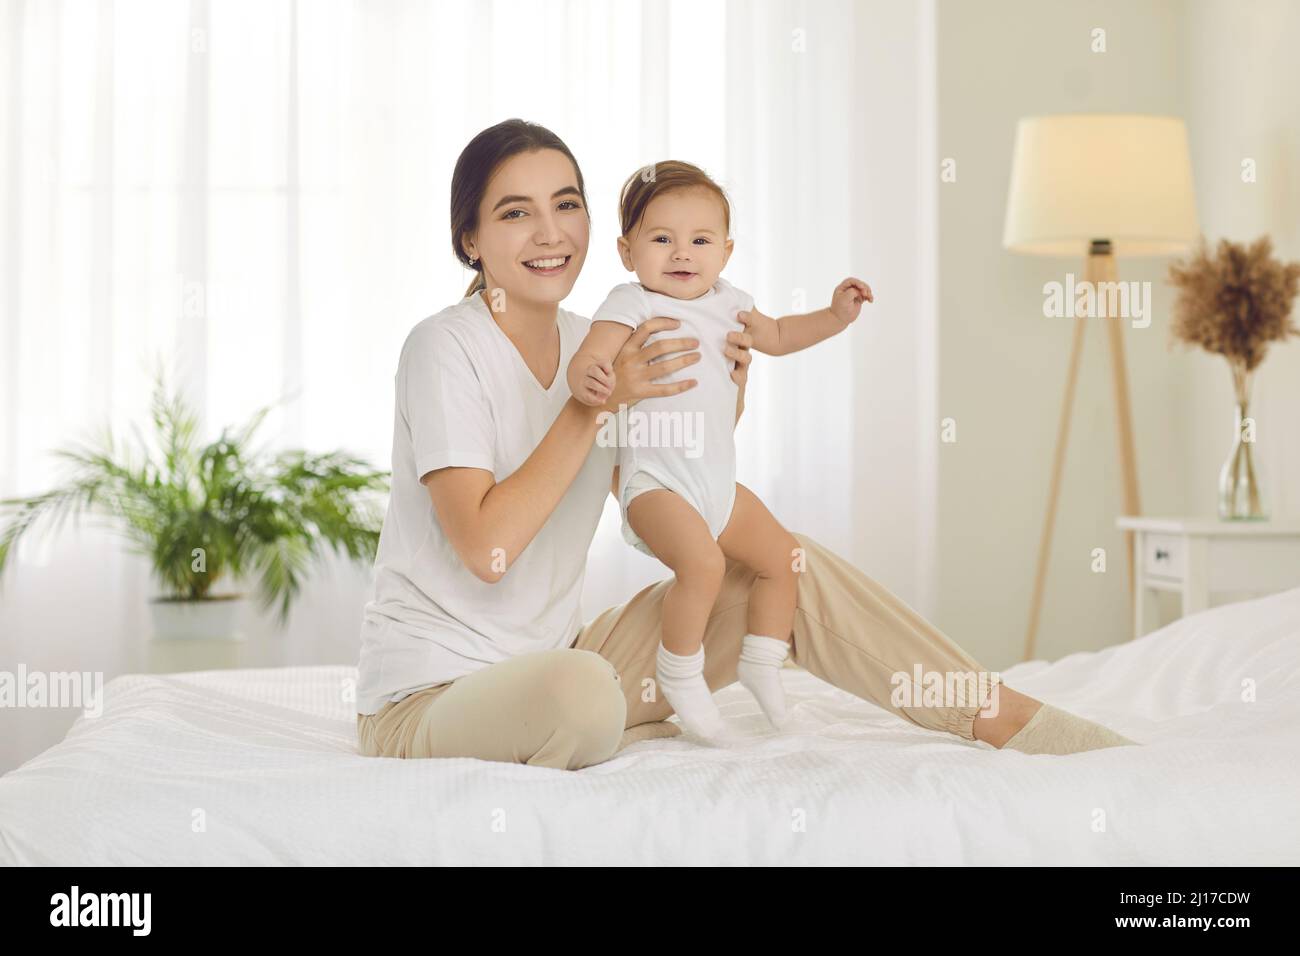 Portrait of happy mother with newborn baby infant Stock Photo